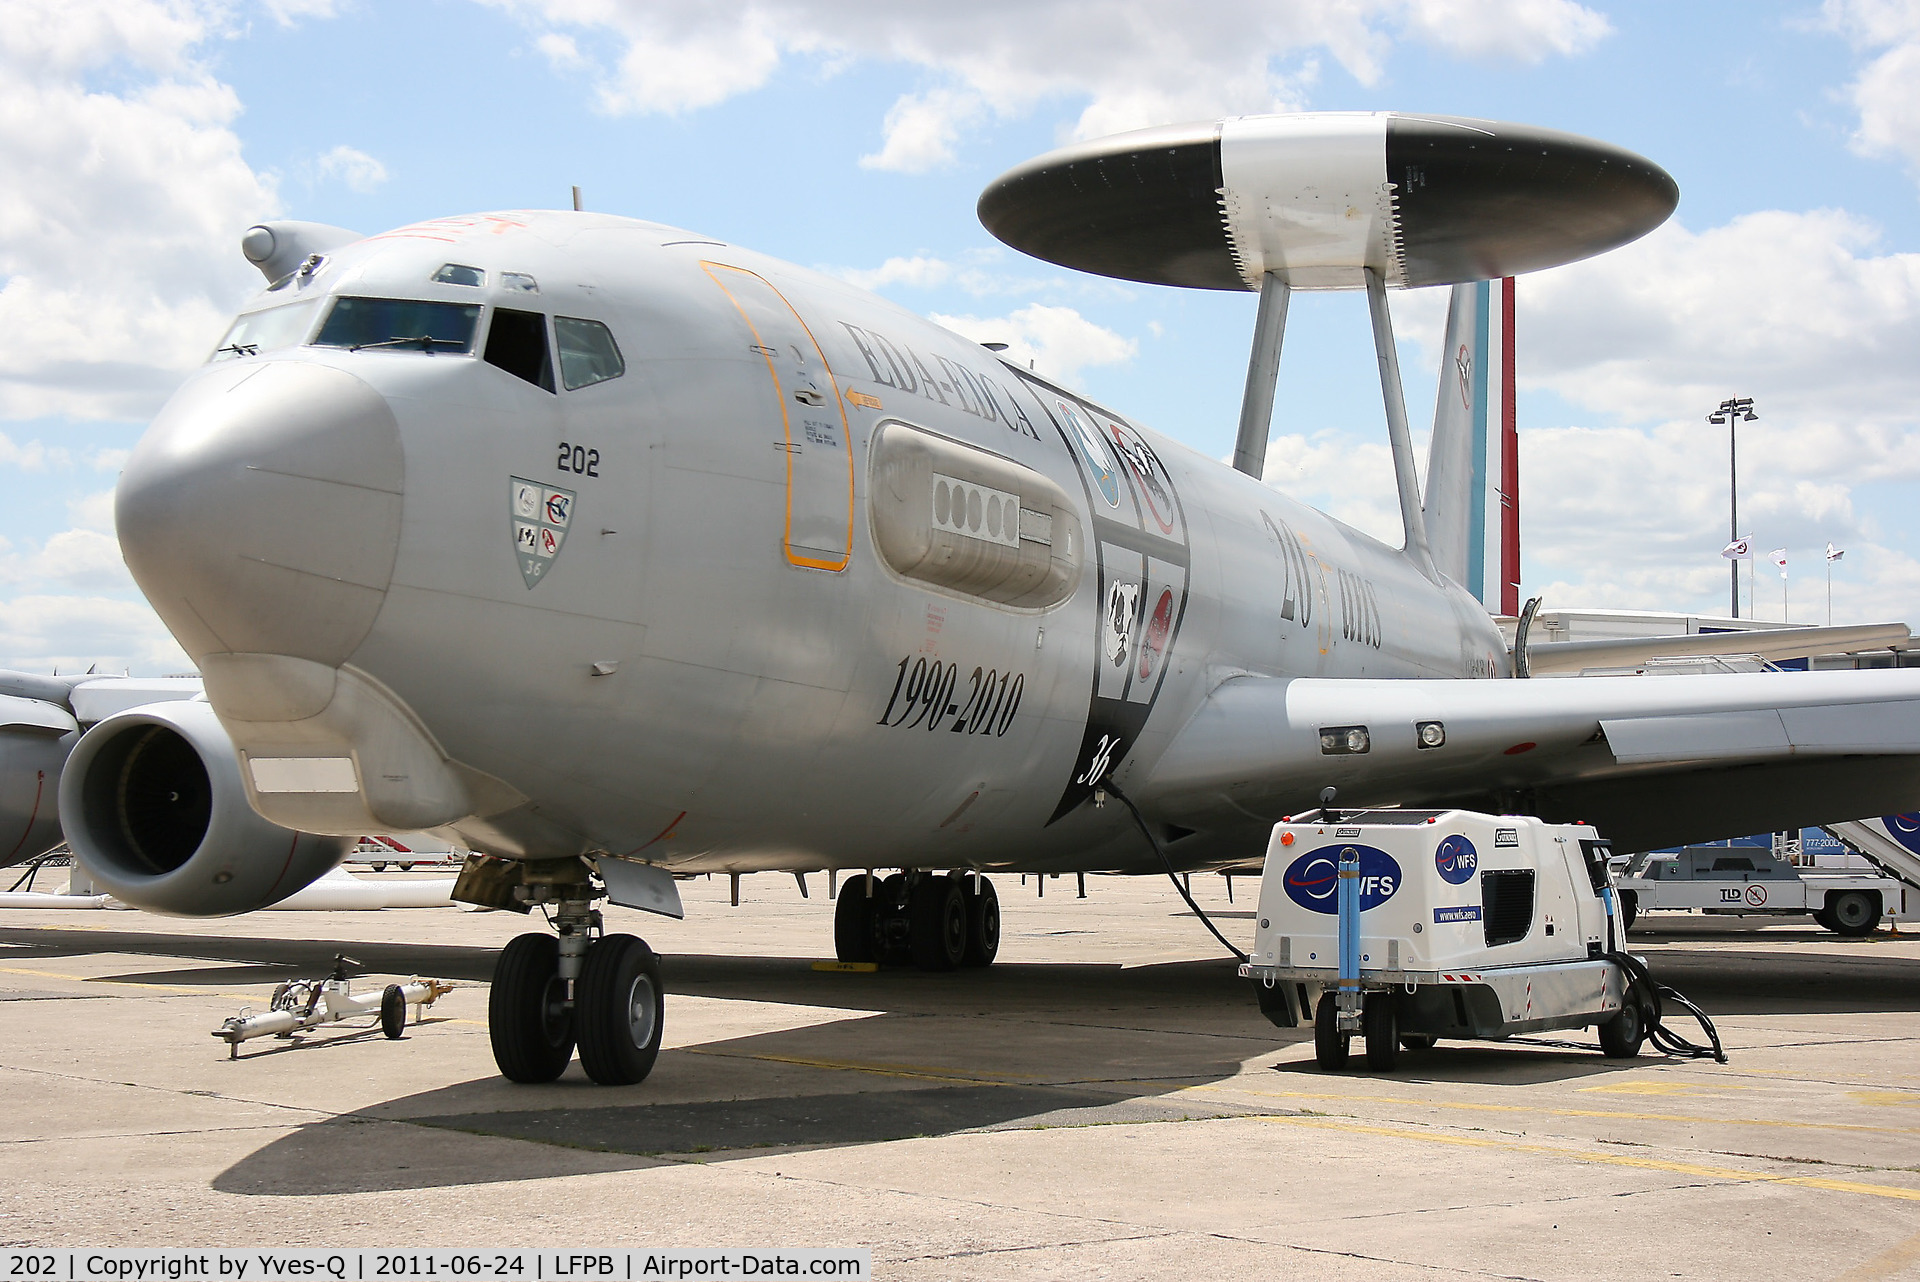 202, 1990 Boeing E-3F (707-300) Sentry C/N 24116, French Air Force Boing E-3F SDCA, Static display, Paris Le Bourget Airport (LFPB-LBG) Air show 2011